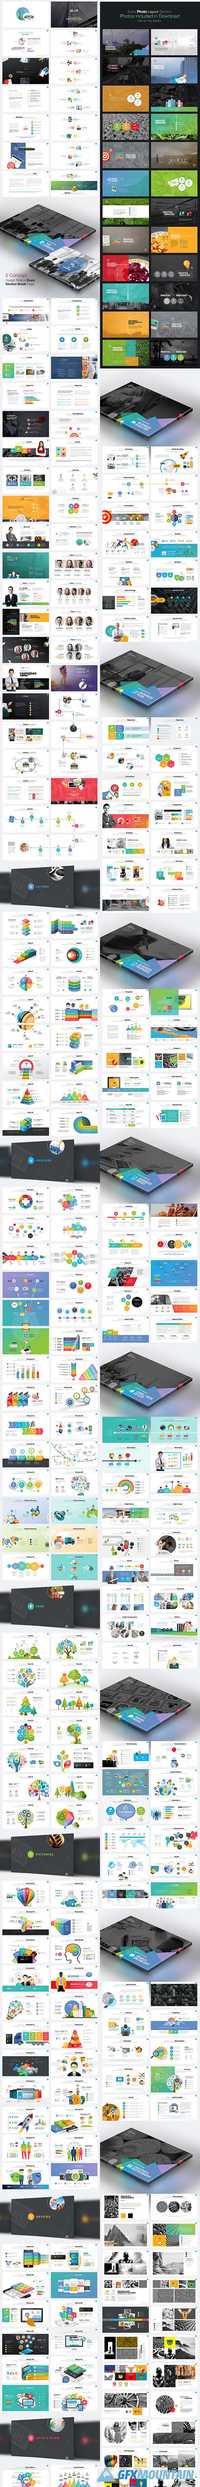 Digit | One-Stop Business Powerpoint 14314598